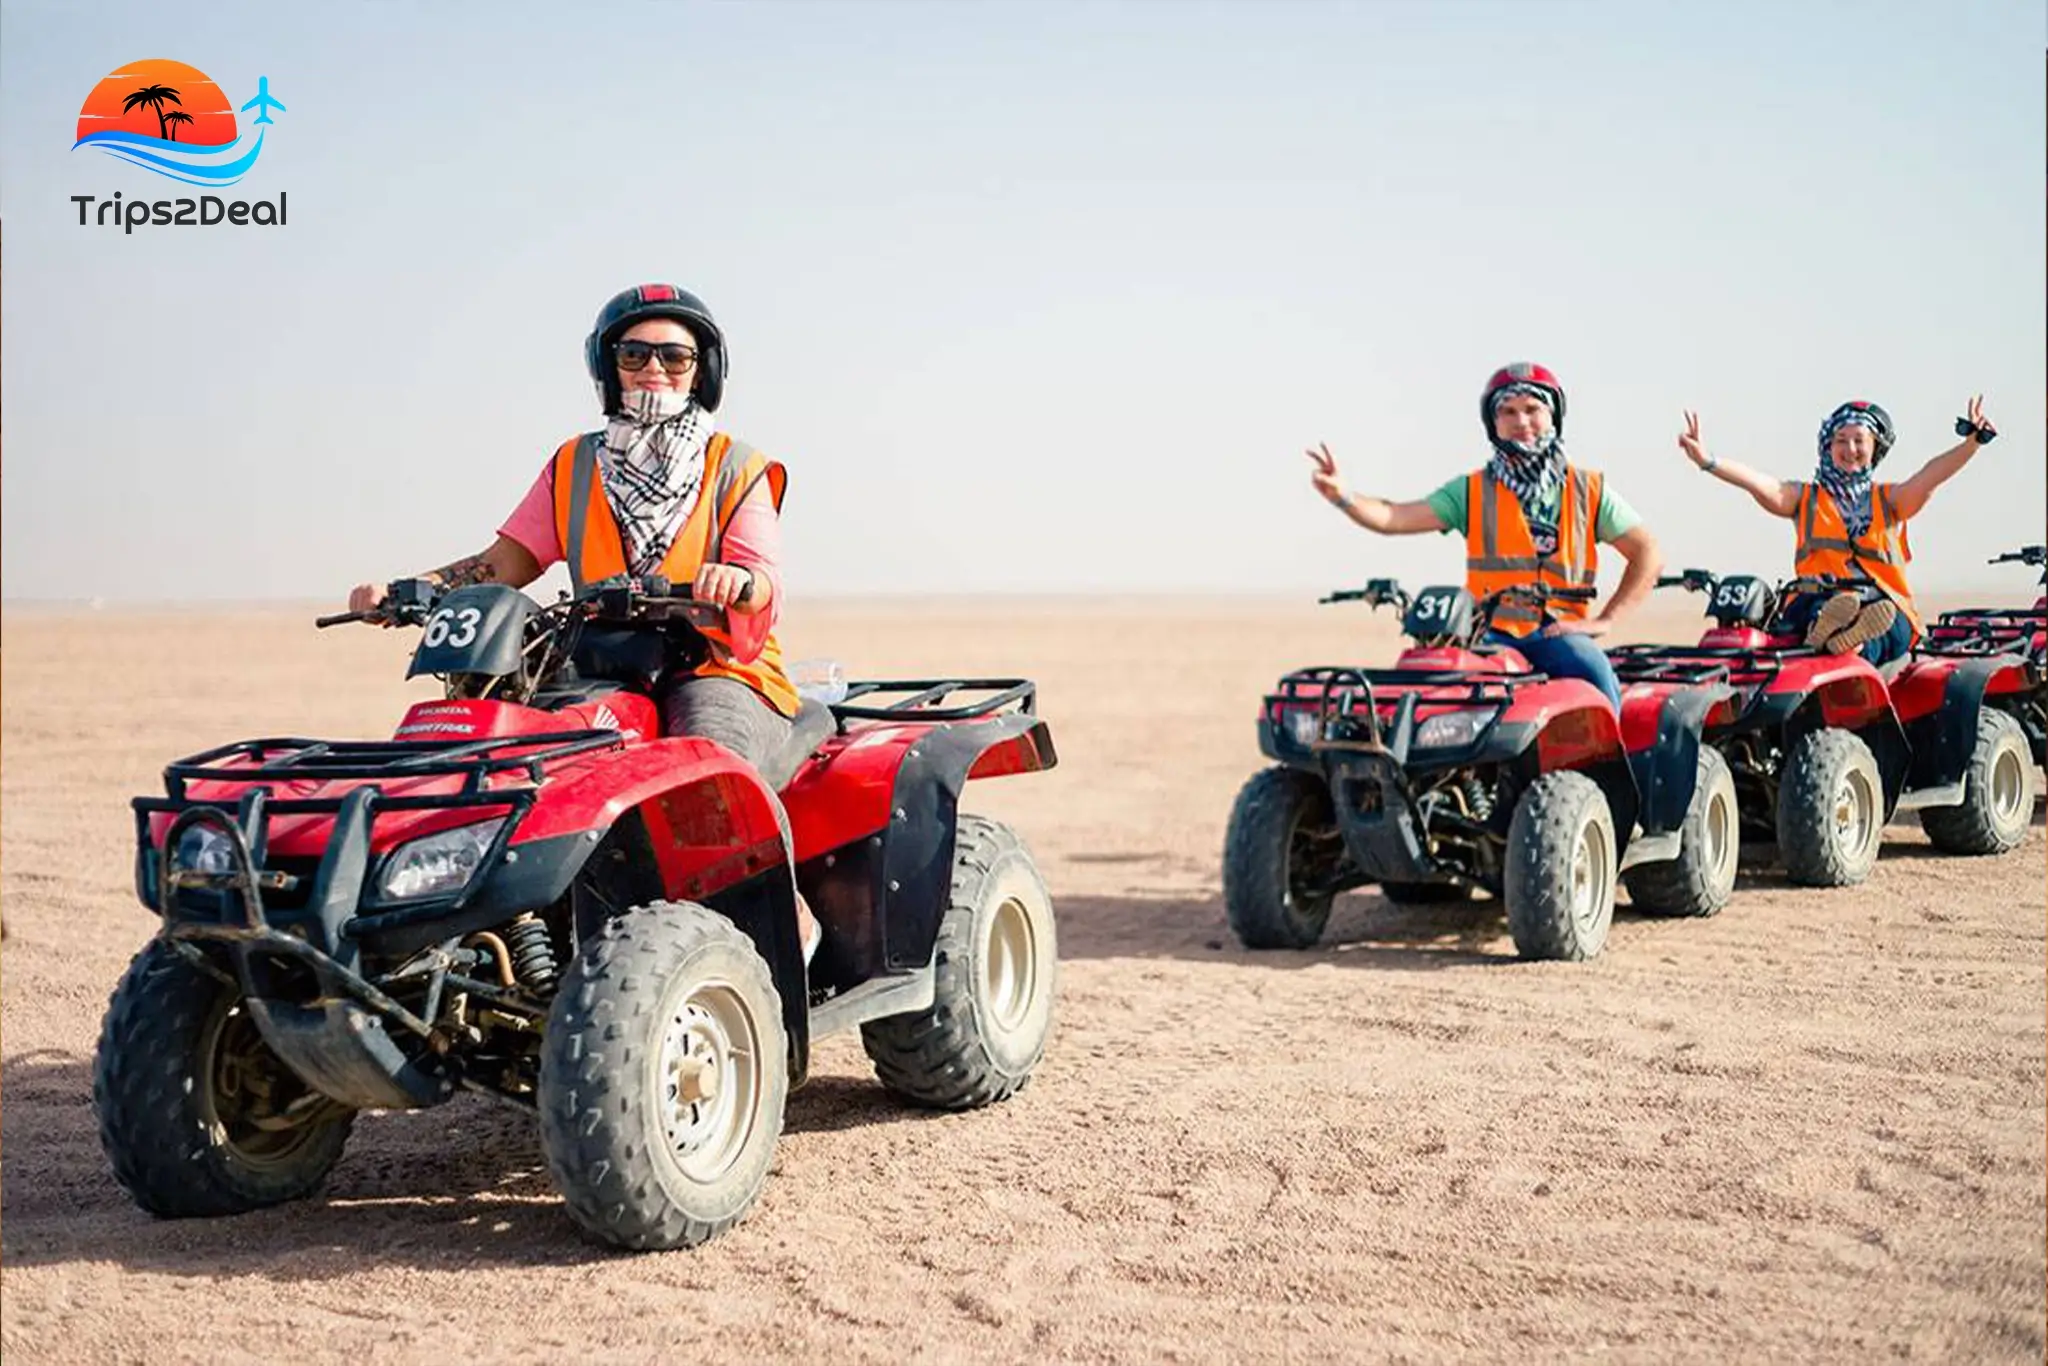 Quad Biking in the desert in Marsa Alam with a sunset view, BBQ Dinner and Show